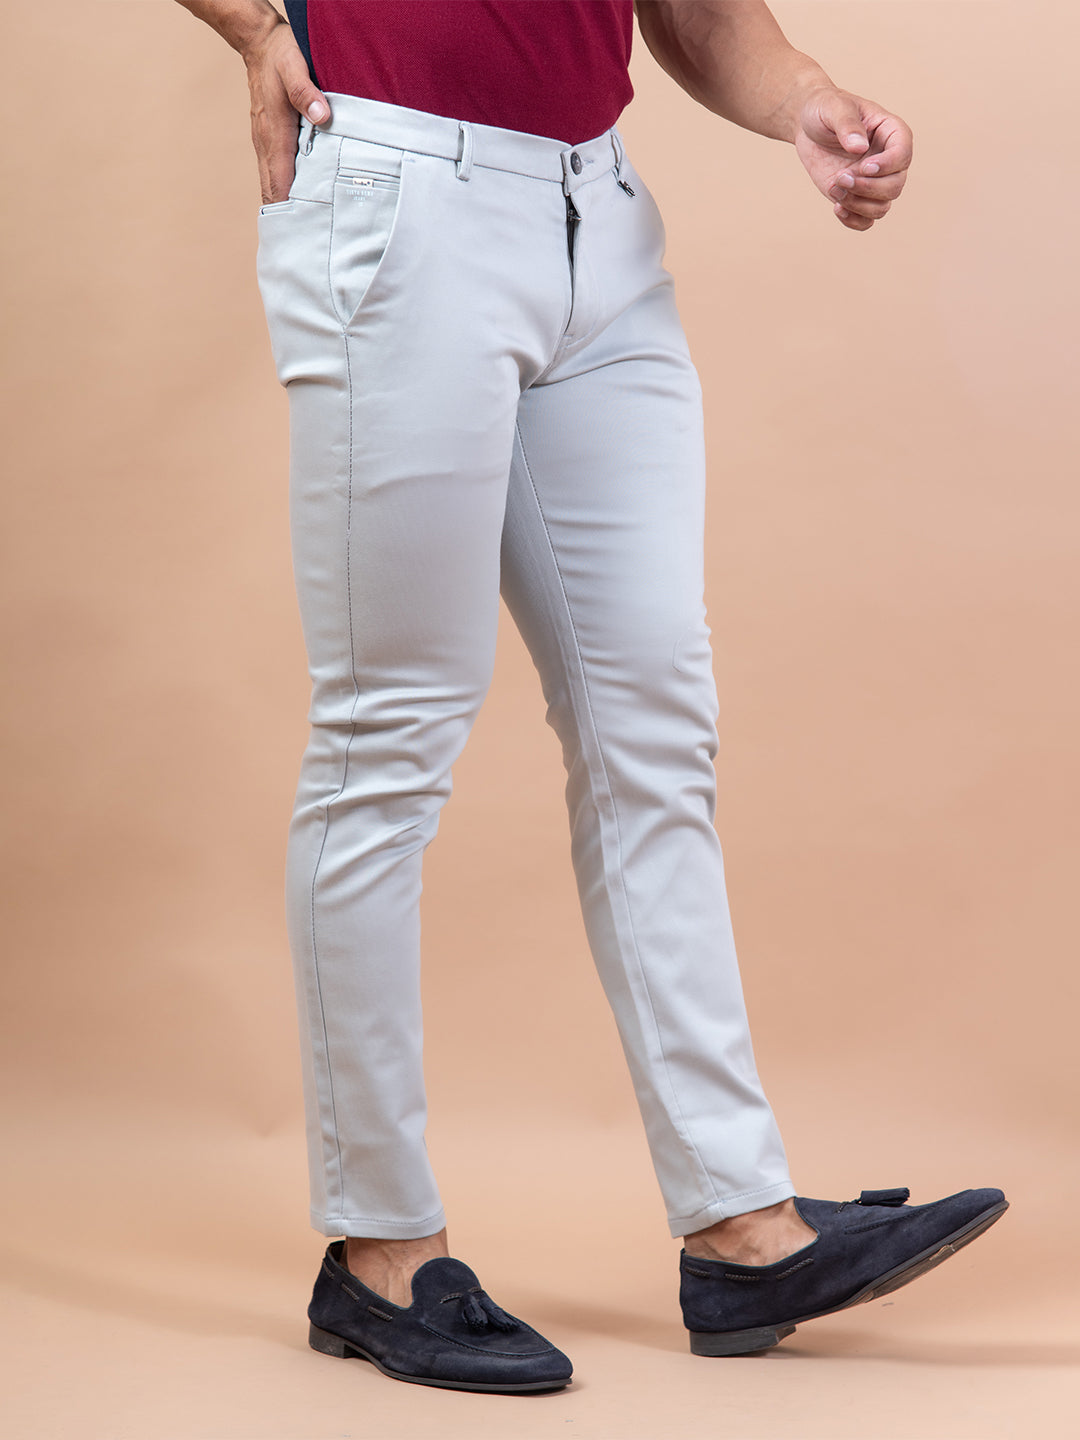 Buy DUNT:-Women's Cotton Pants Cream Online In India At Discounted Prices